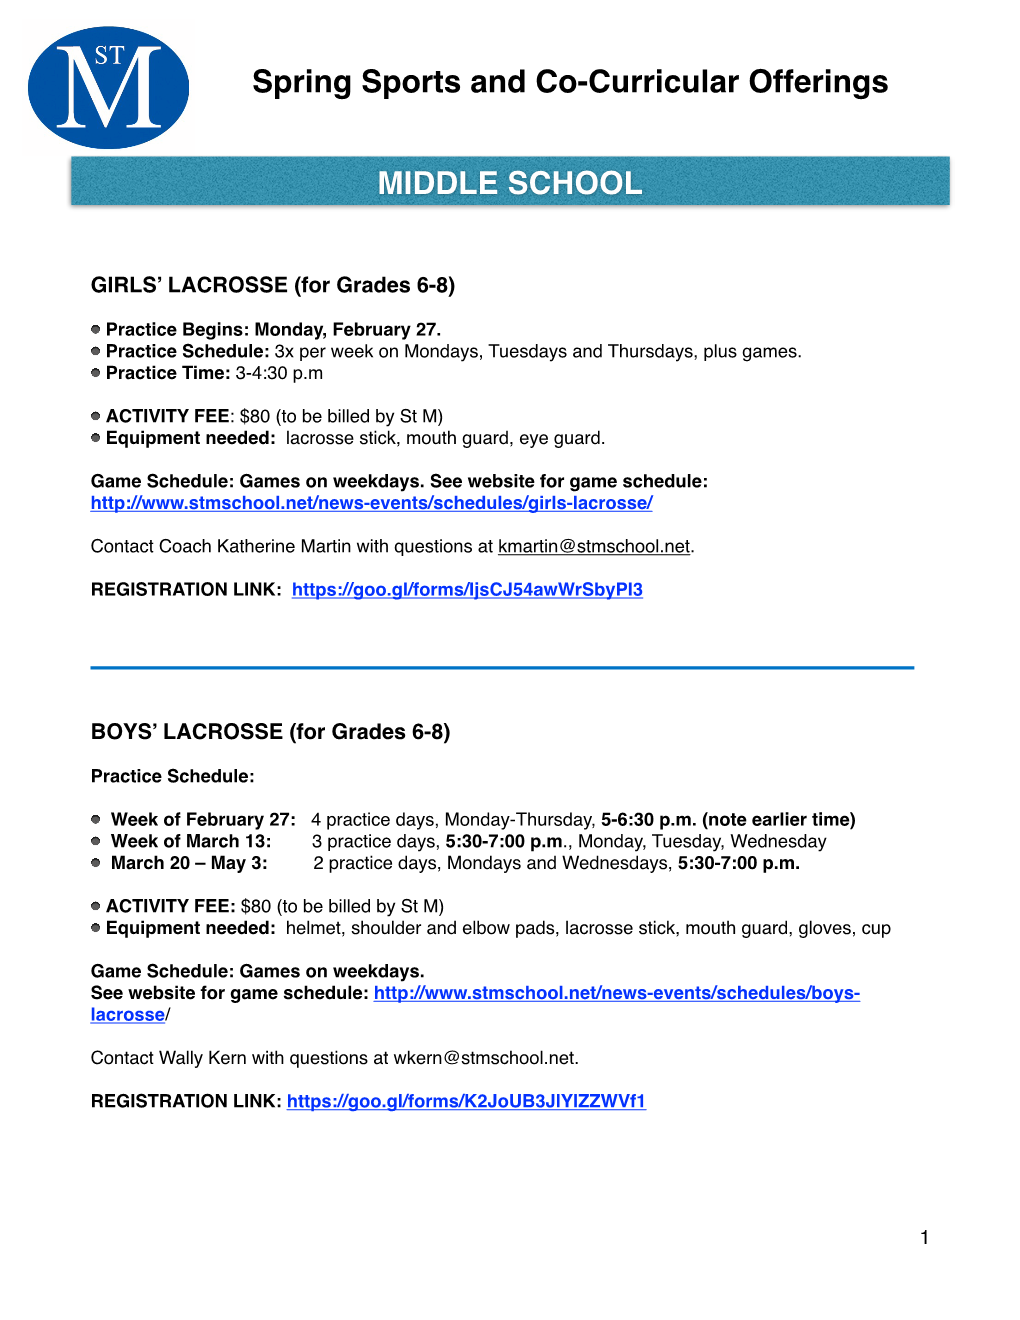 MS Spring Sports/Cocurric Offering